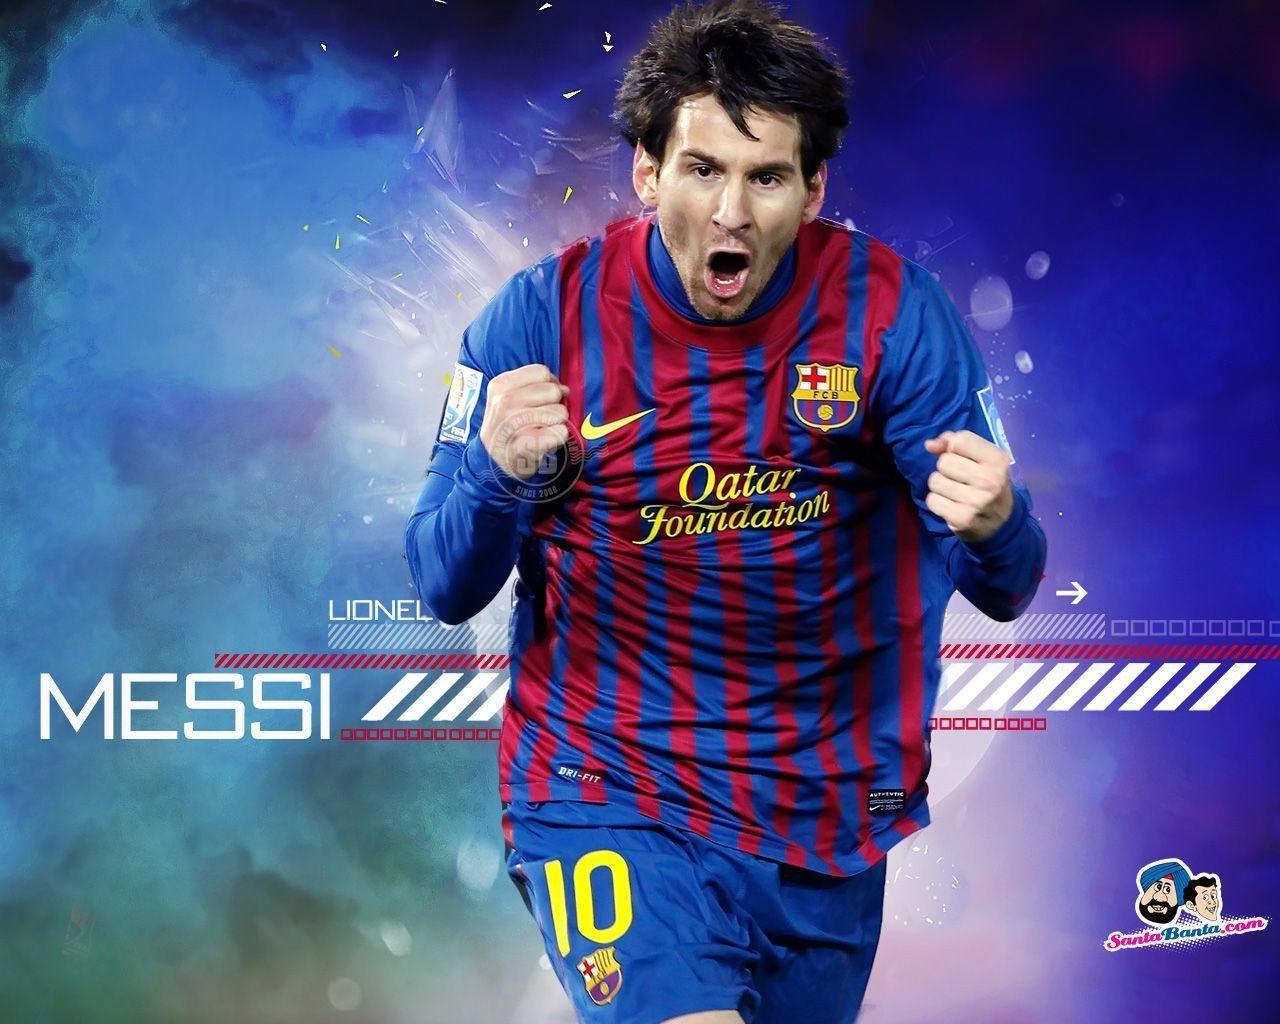 Lionel Messi Wallpapers 10 - Wallpaper Cave